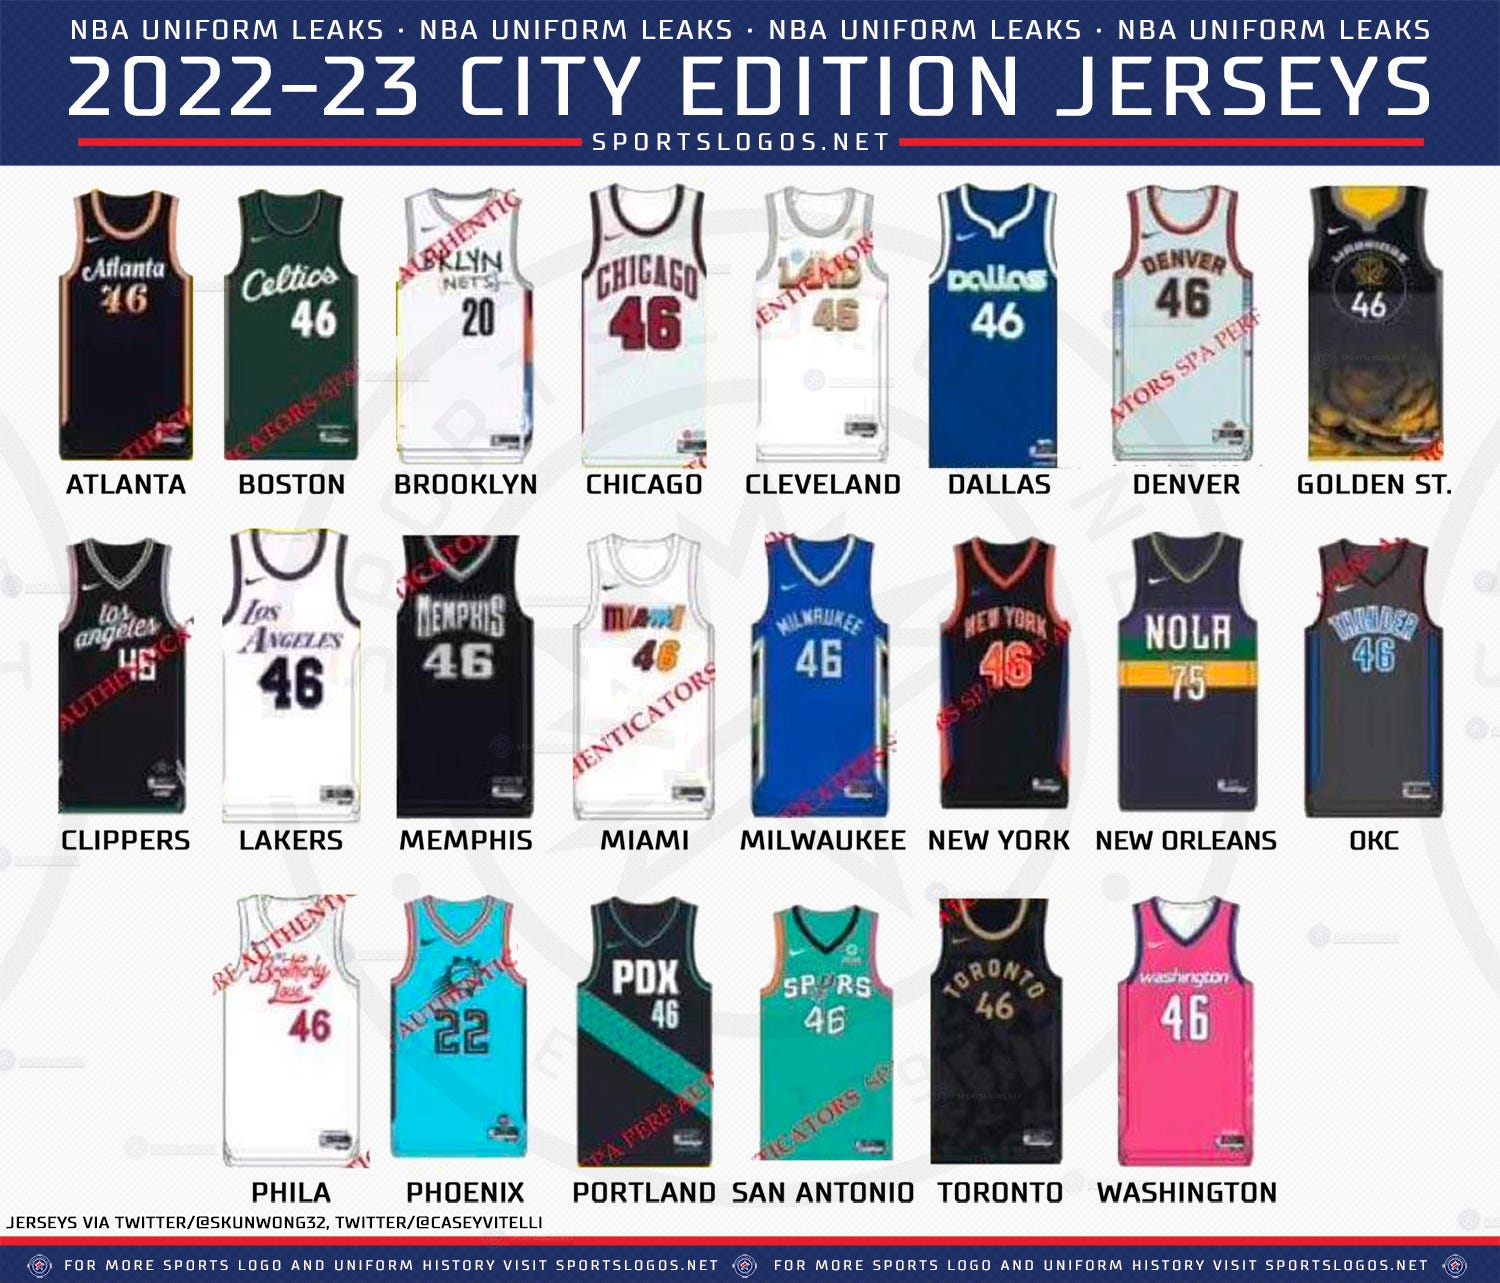 NBA website offers glimpse at uniform matchups throughout 2021-22